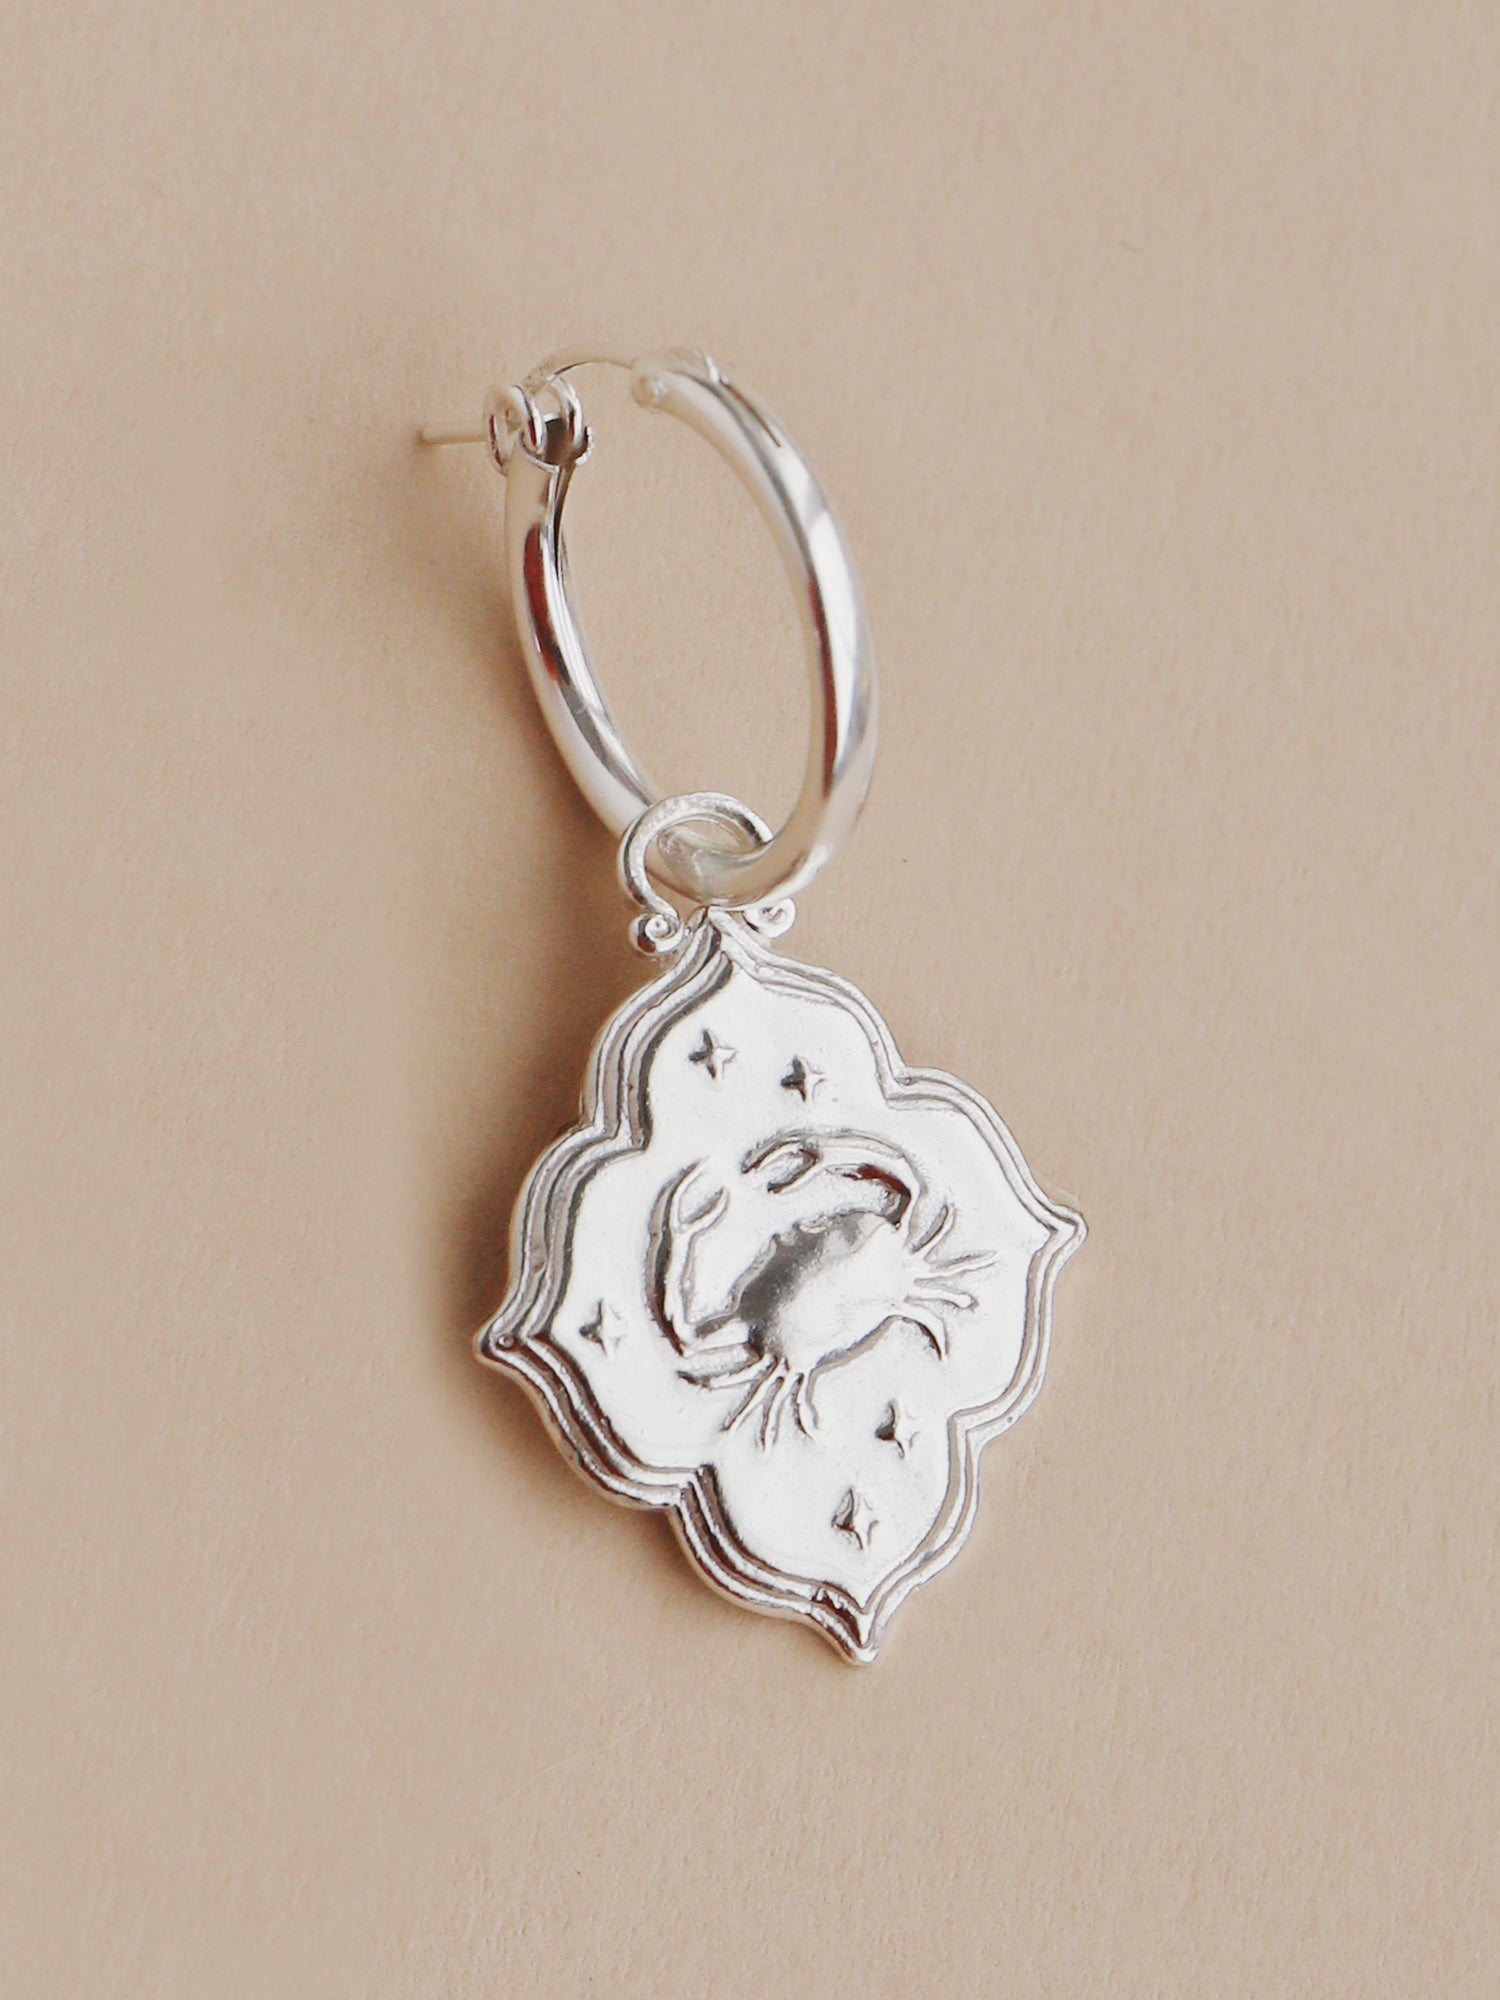 Cancer - Individual Charm in Silver